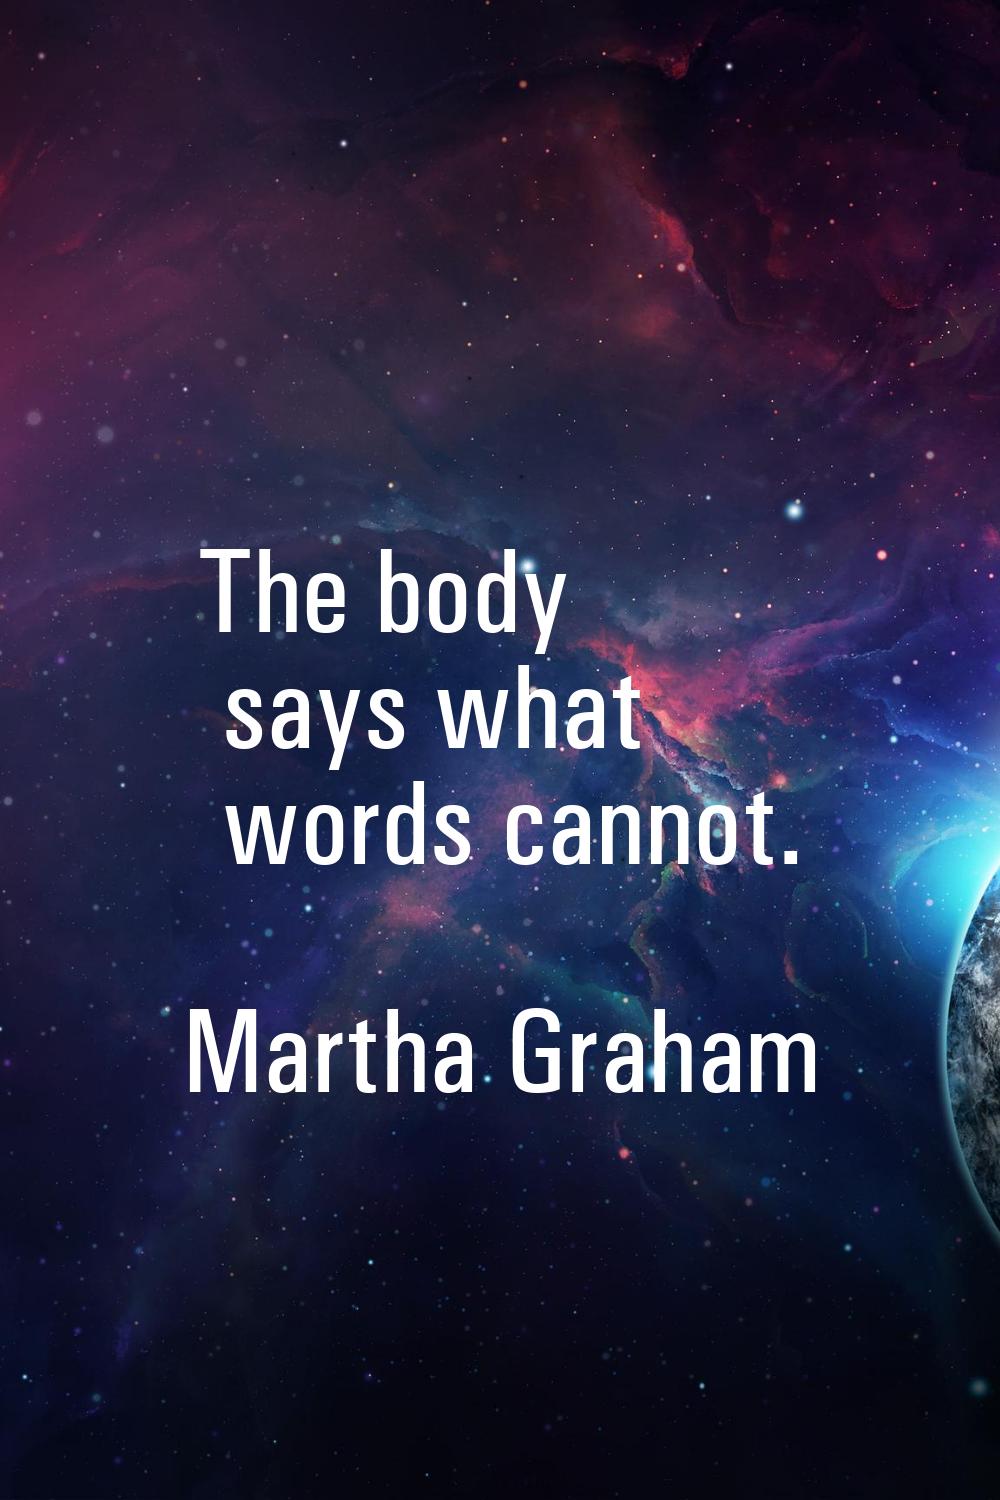 The body says what words cannot.